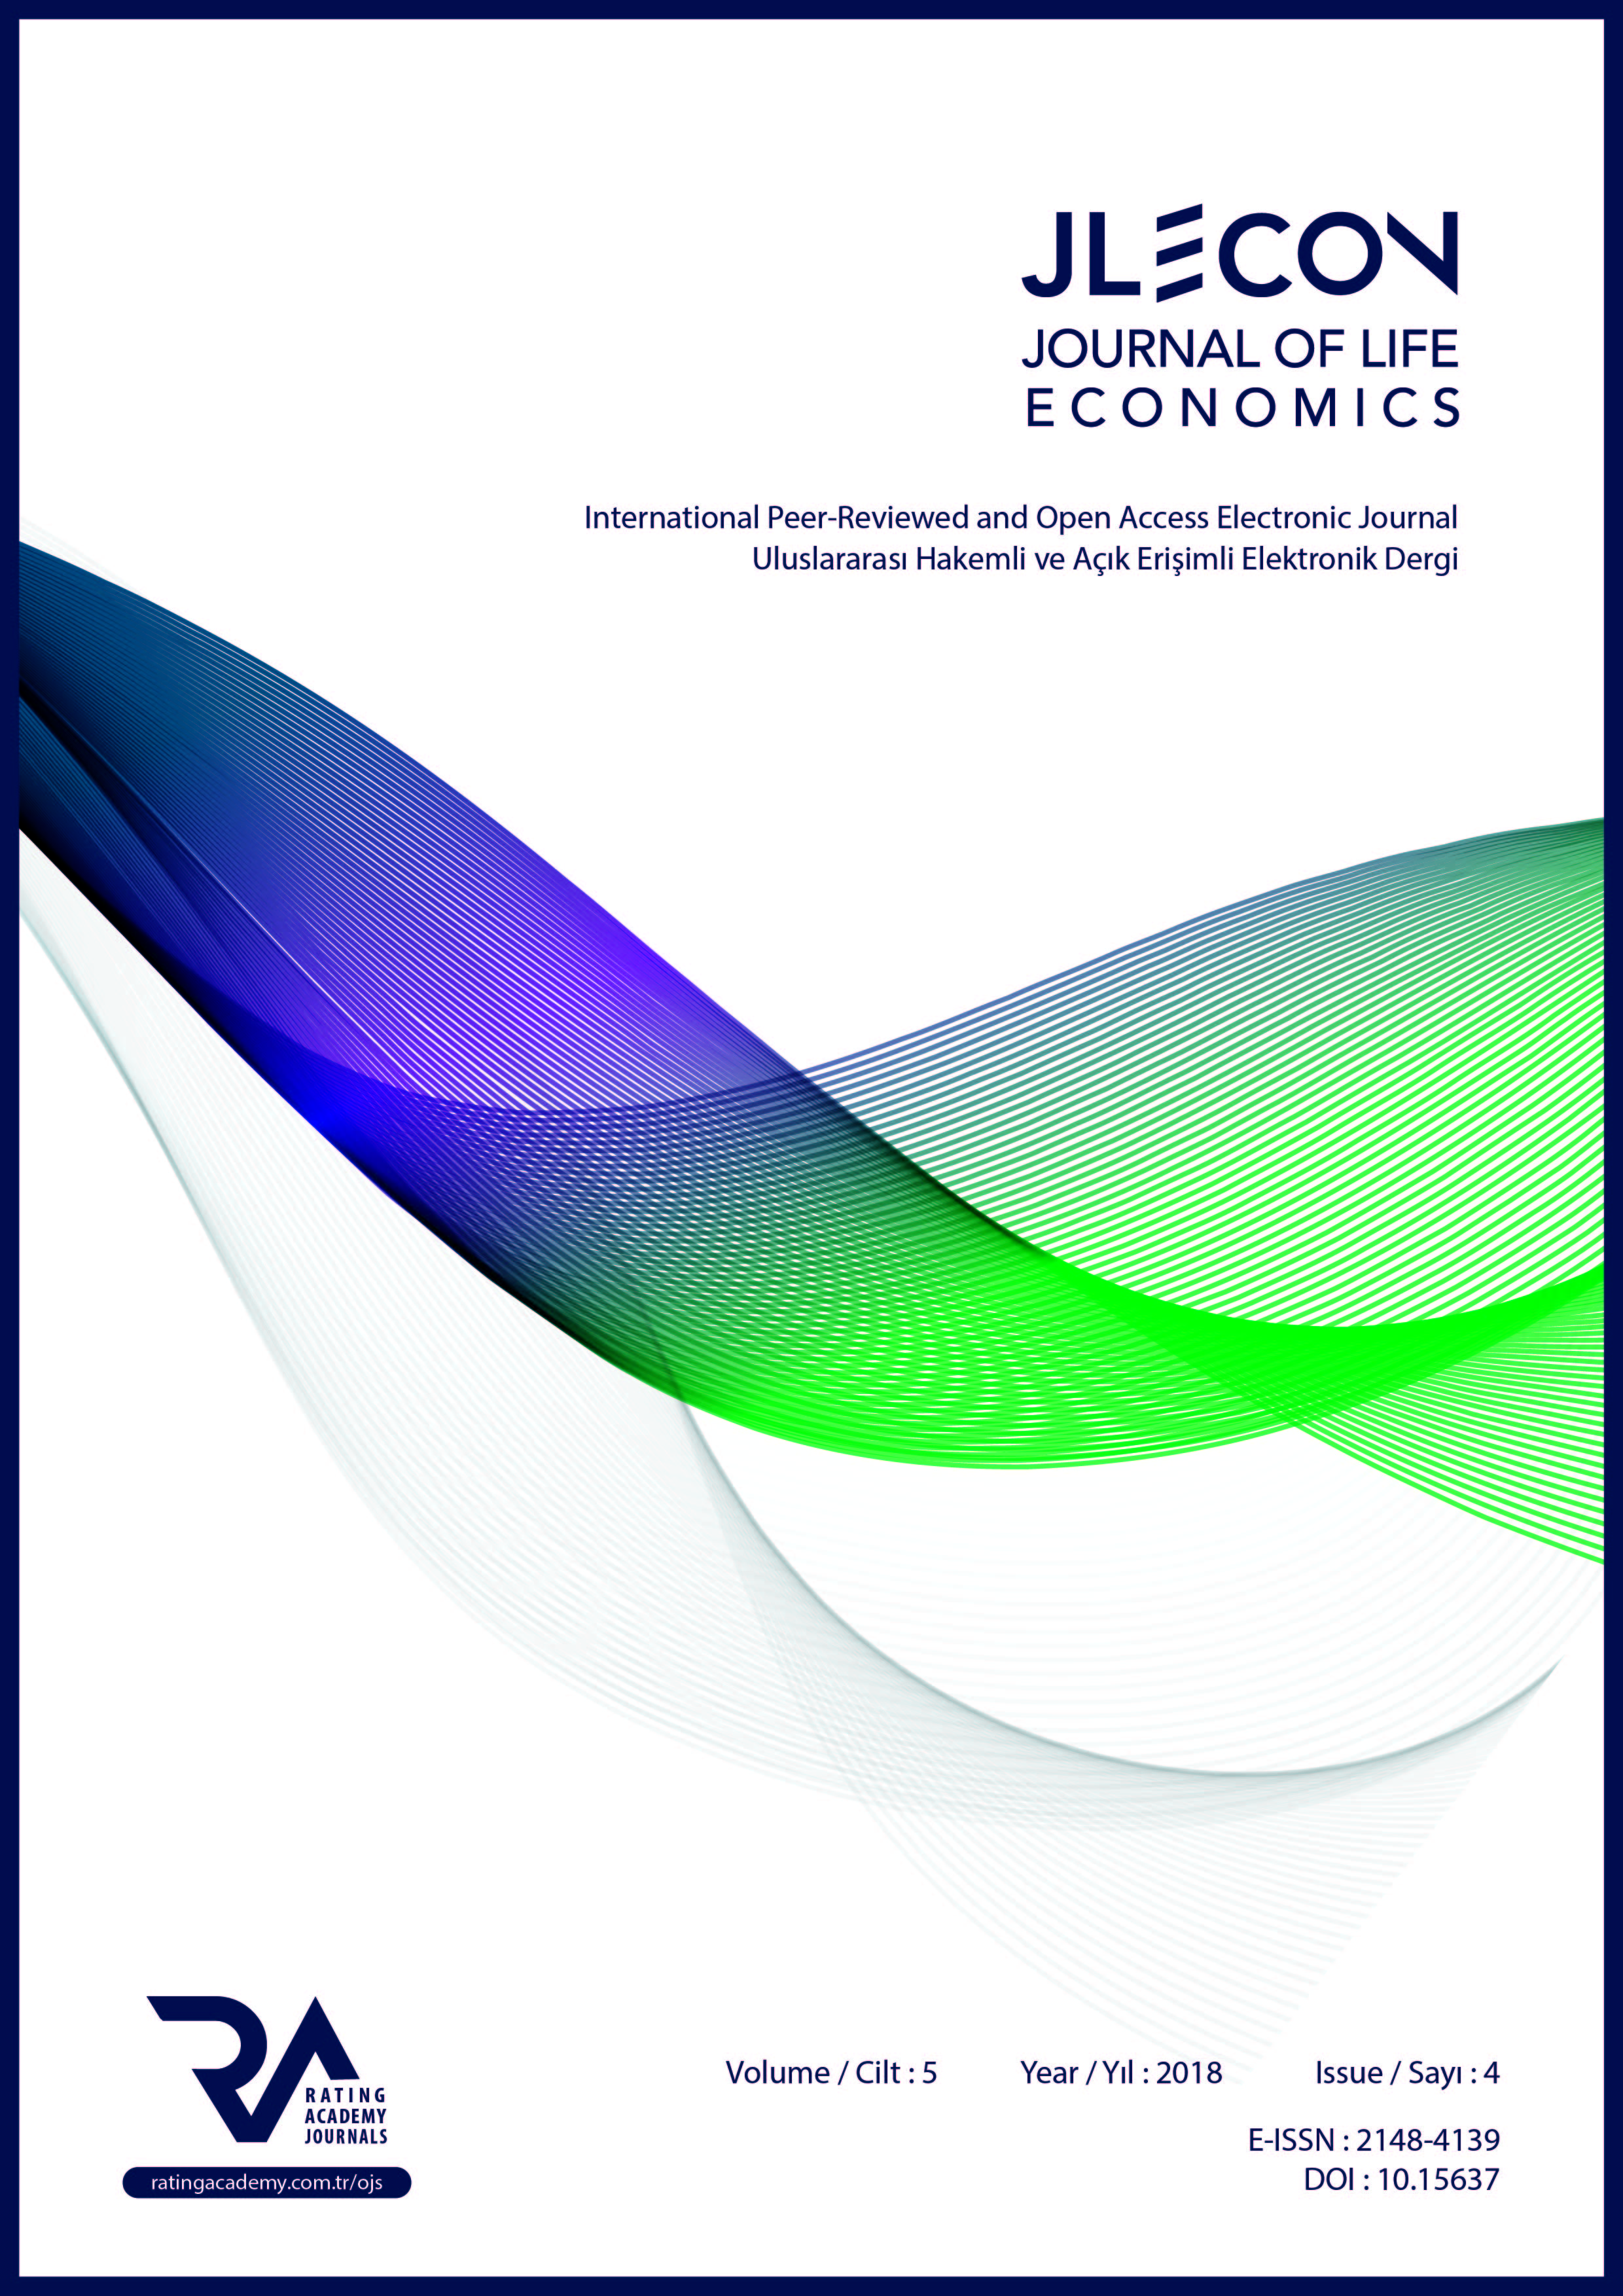 SUSTAINABILITY OF THE CURRENT ACCOUNT DEFICT IN TURKISH ECONOMY: A PERIODIC TIME SERIES ANALYSIS WITH STRUCTURAL BREAKS (1984Q1-2017Q4) Cover Image